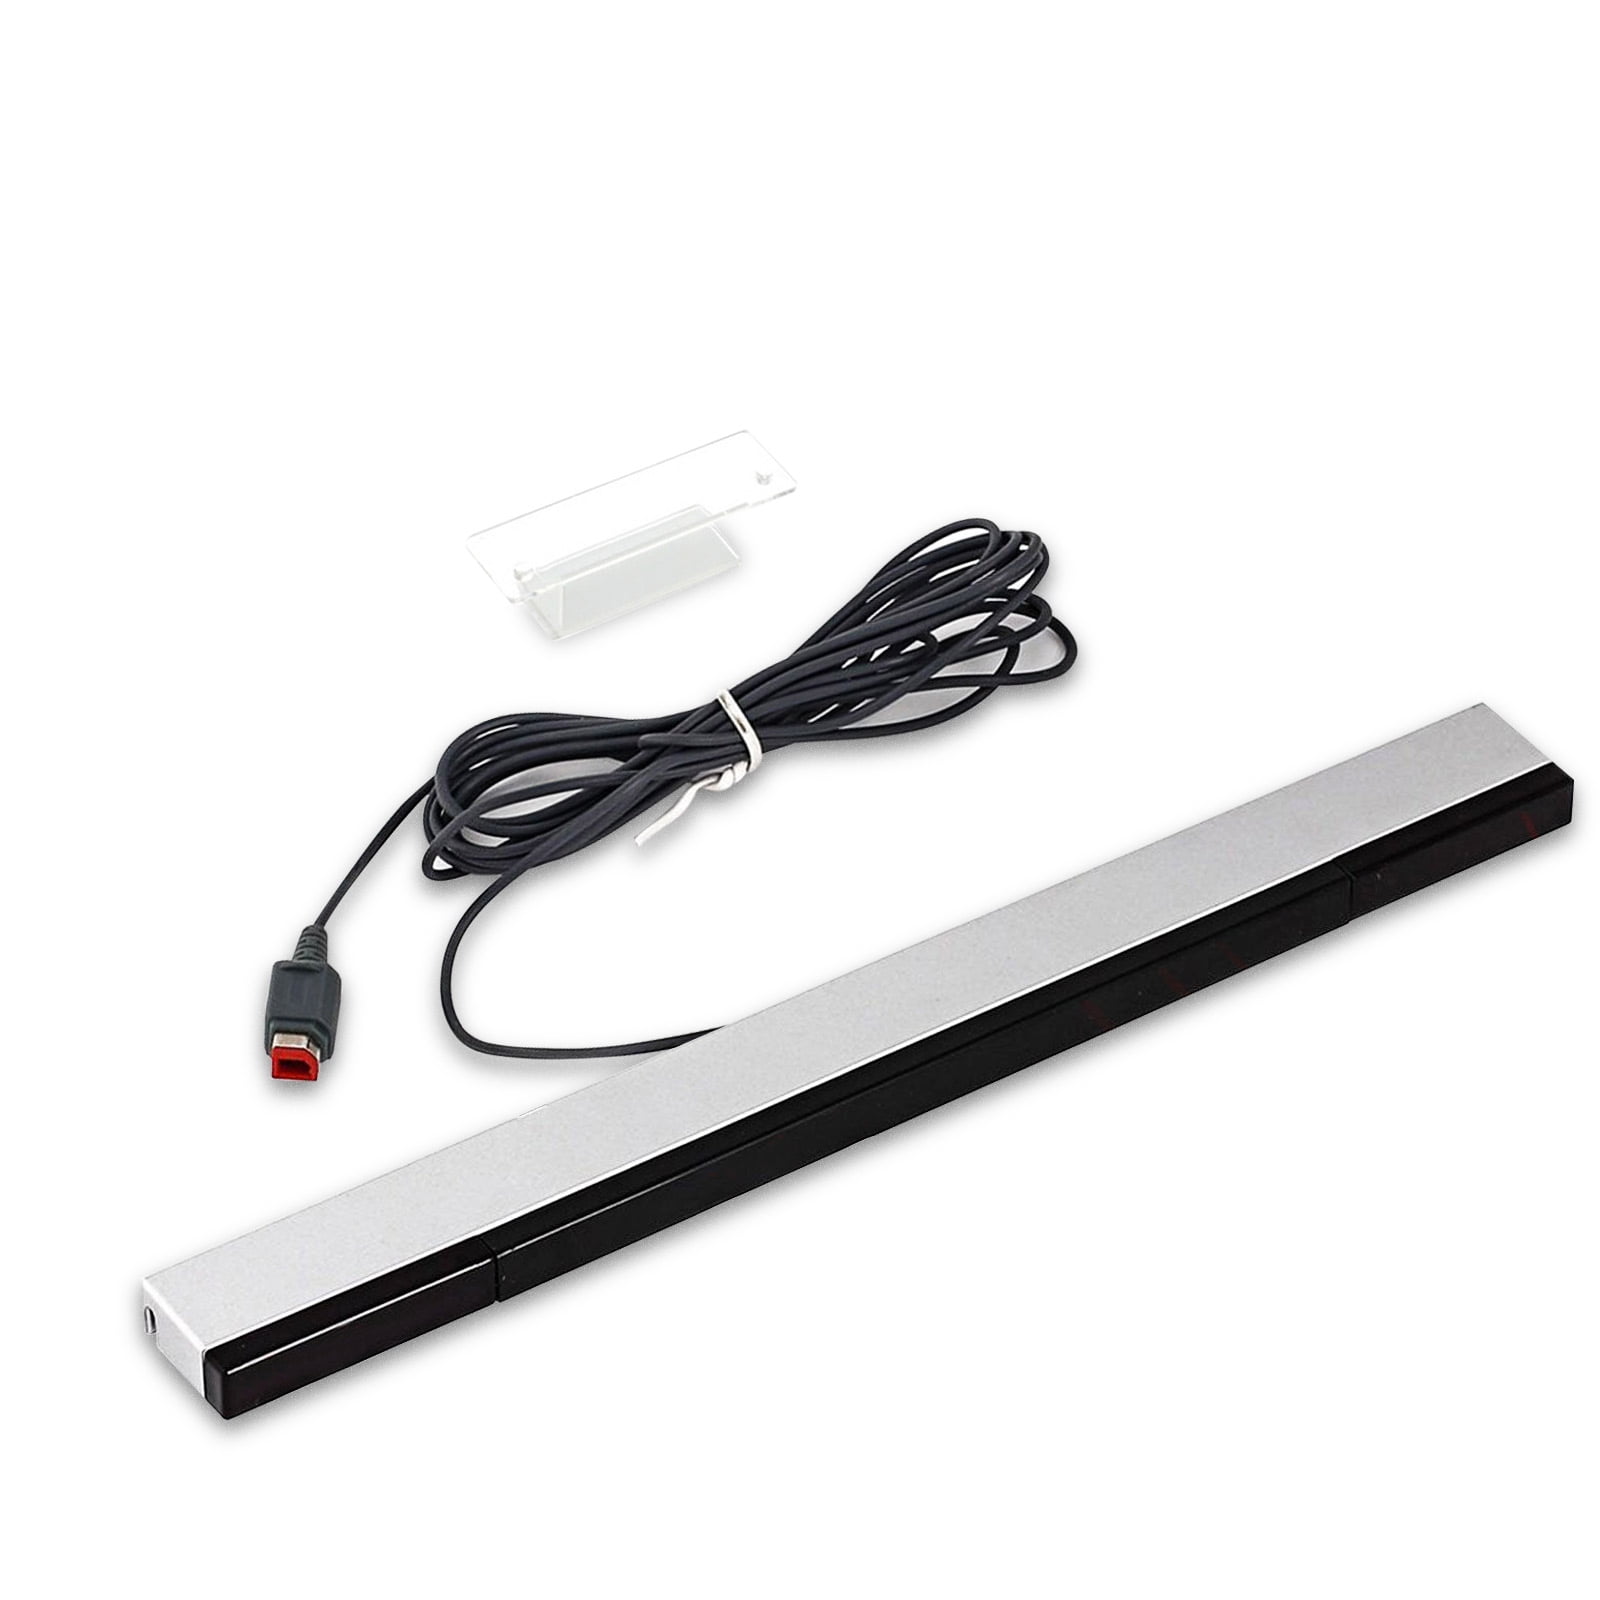 Wig type helikopter Wired Infrared Sensor Bar Fit for Nintendo Wii /Wii U Console, TSV 2/1 Pcs  Replacement Wired IR Ray Motion Receiver Sensor Bar With Stand for Nintendo Wii  Wii U - Walmart.com